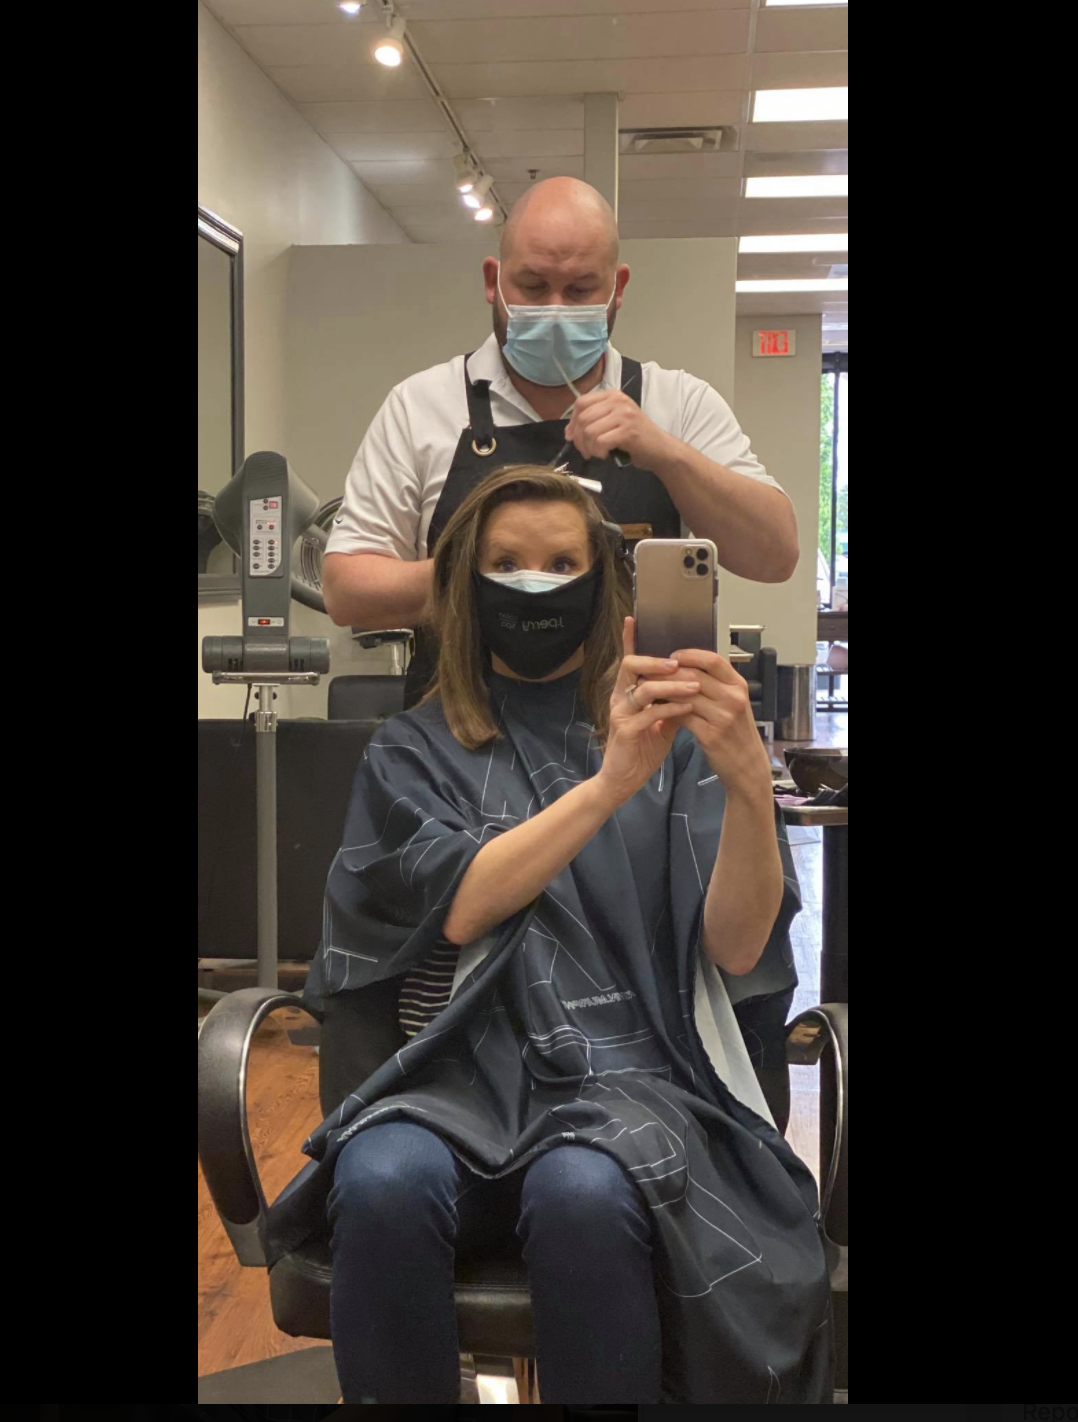 Image of woman getting her hair cut. The woman and man are both wearing small medical facemask.